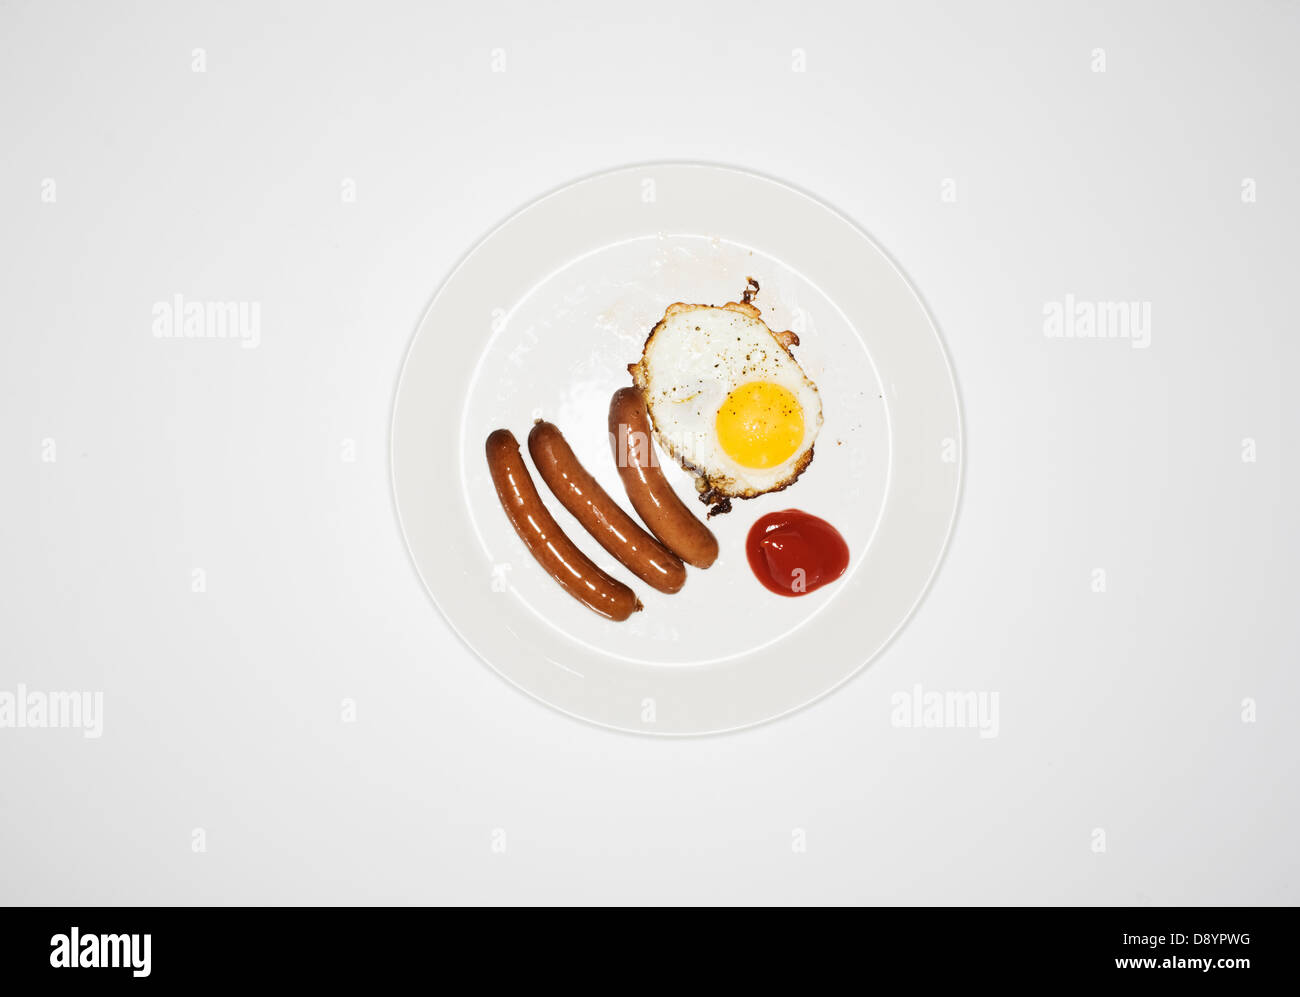 Plate of sausage and fried egg on white background Stock Photo